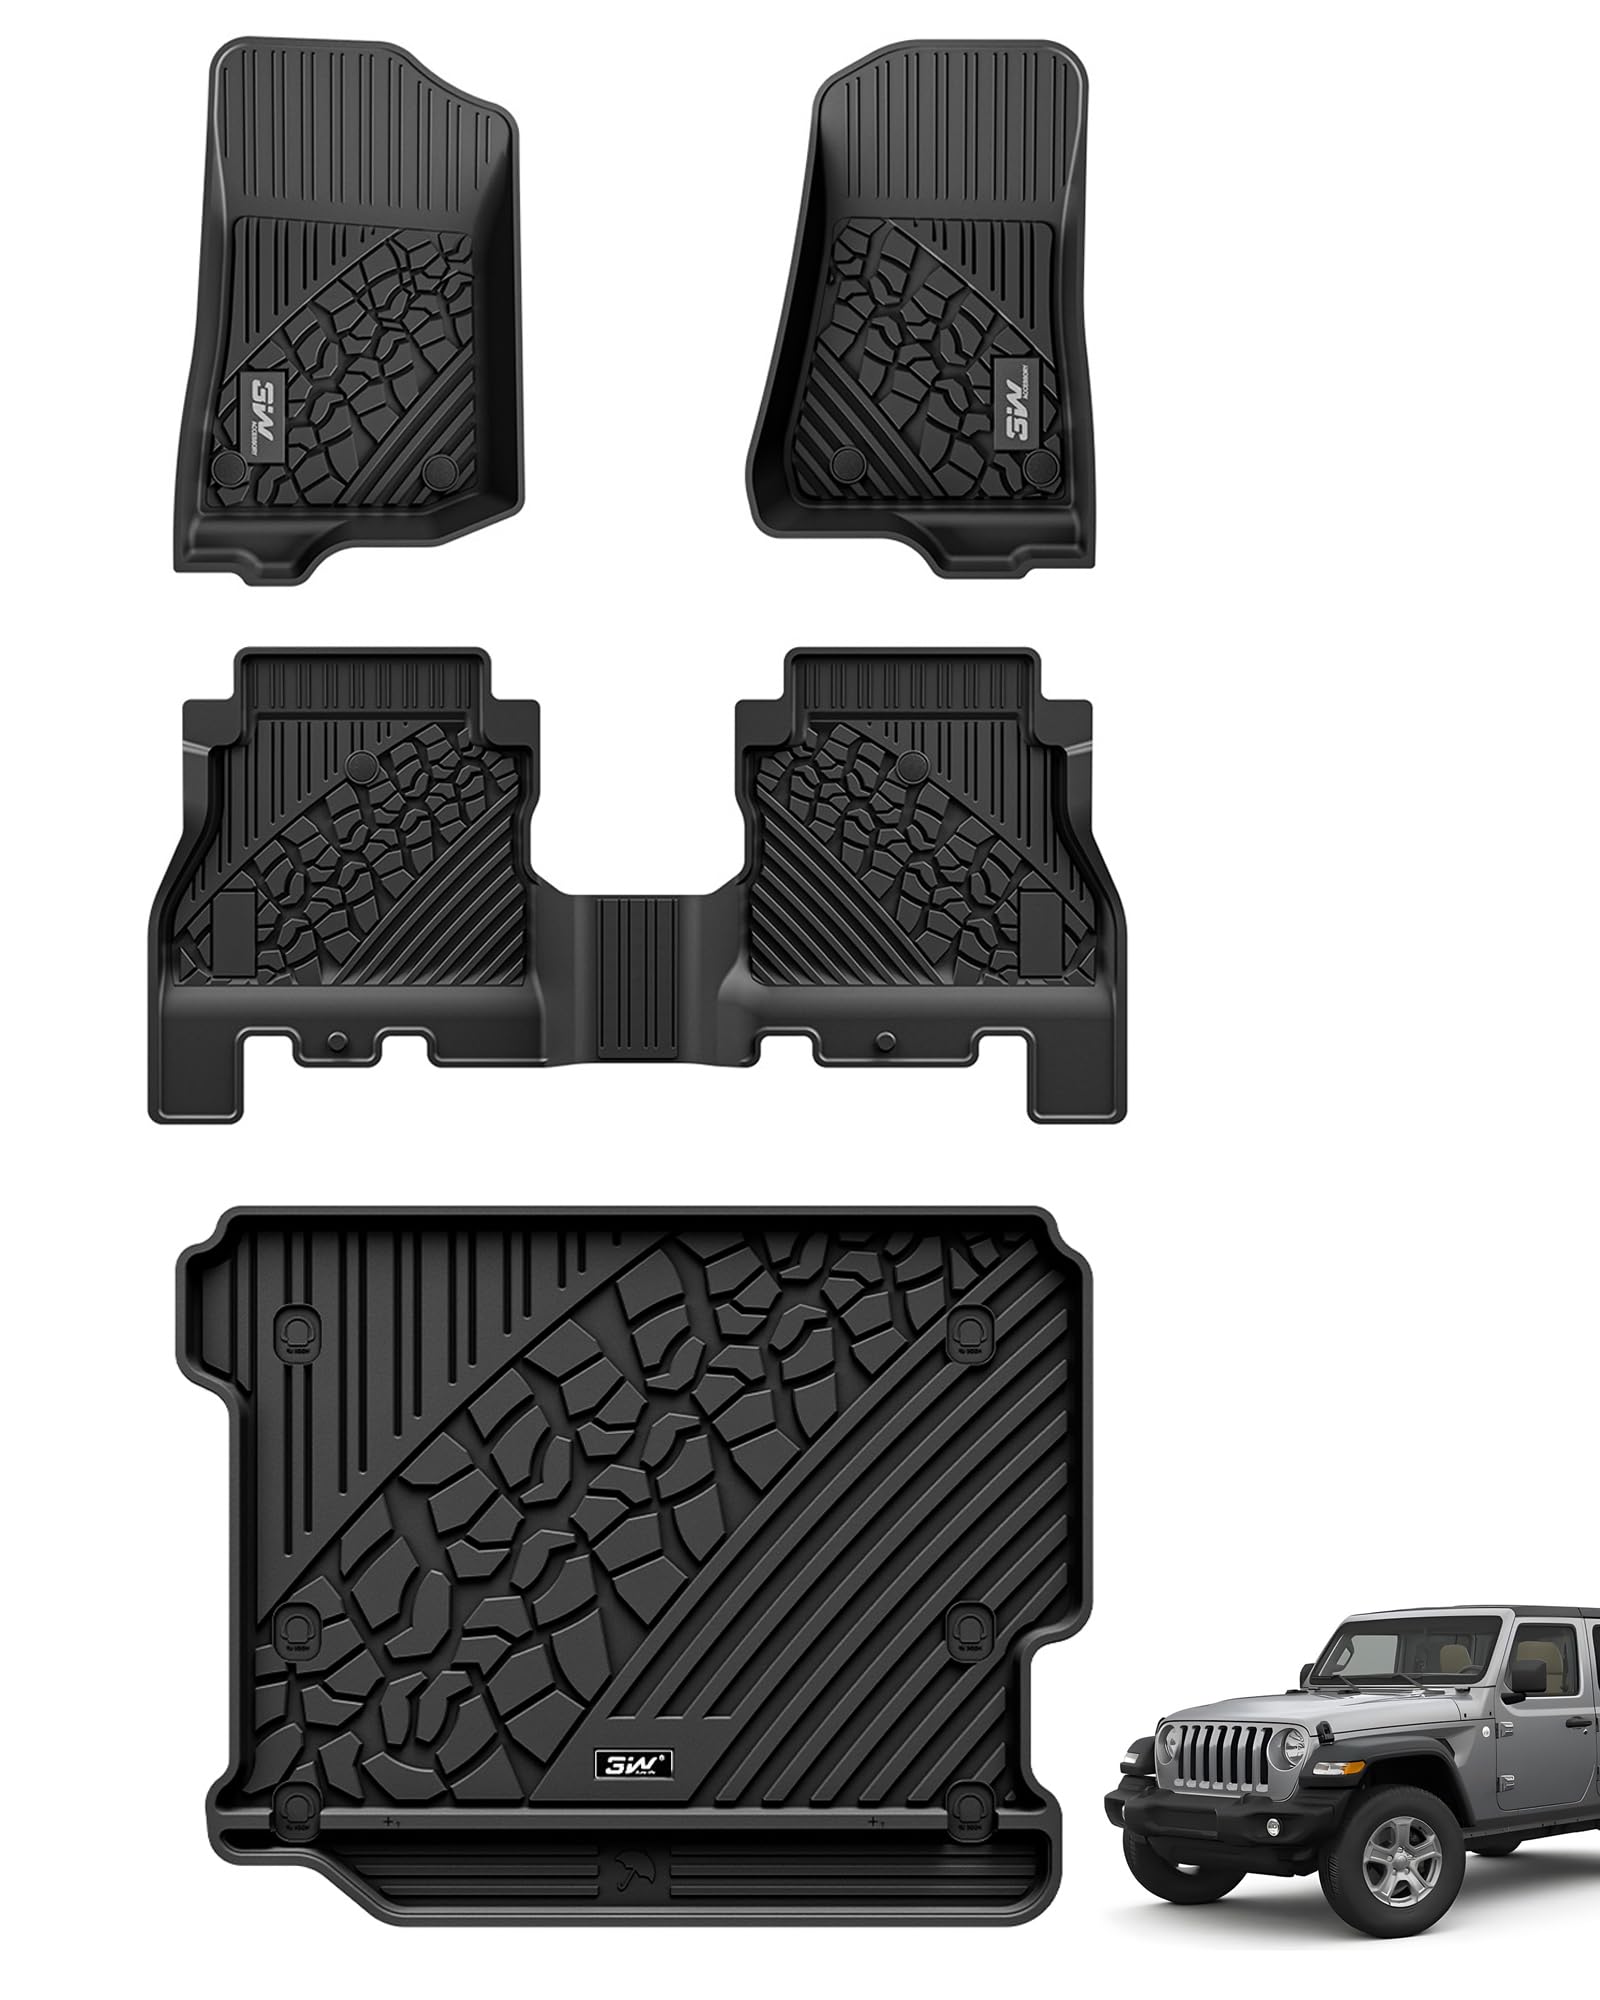 3W Jeep Wrangler JL (Non JK or 4XE) 2018-2023 Custom Floor Mats / Trunk Mat TPE Material & All-Weather Protection Vehicles & Parts 3w 2018-2023 Wrangler JL 2018-2023 without Subwoofer 1st&2nd Row Mats+Trunk Mat